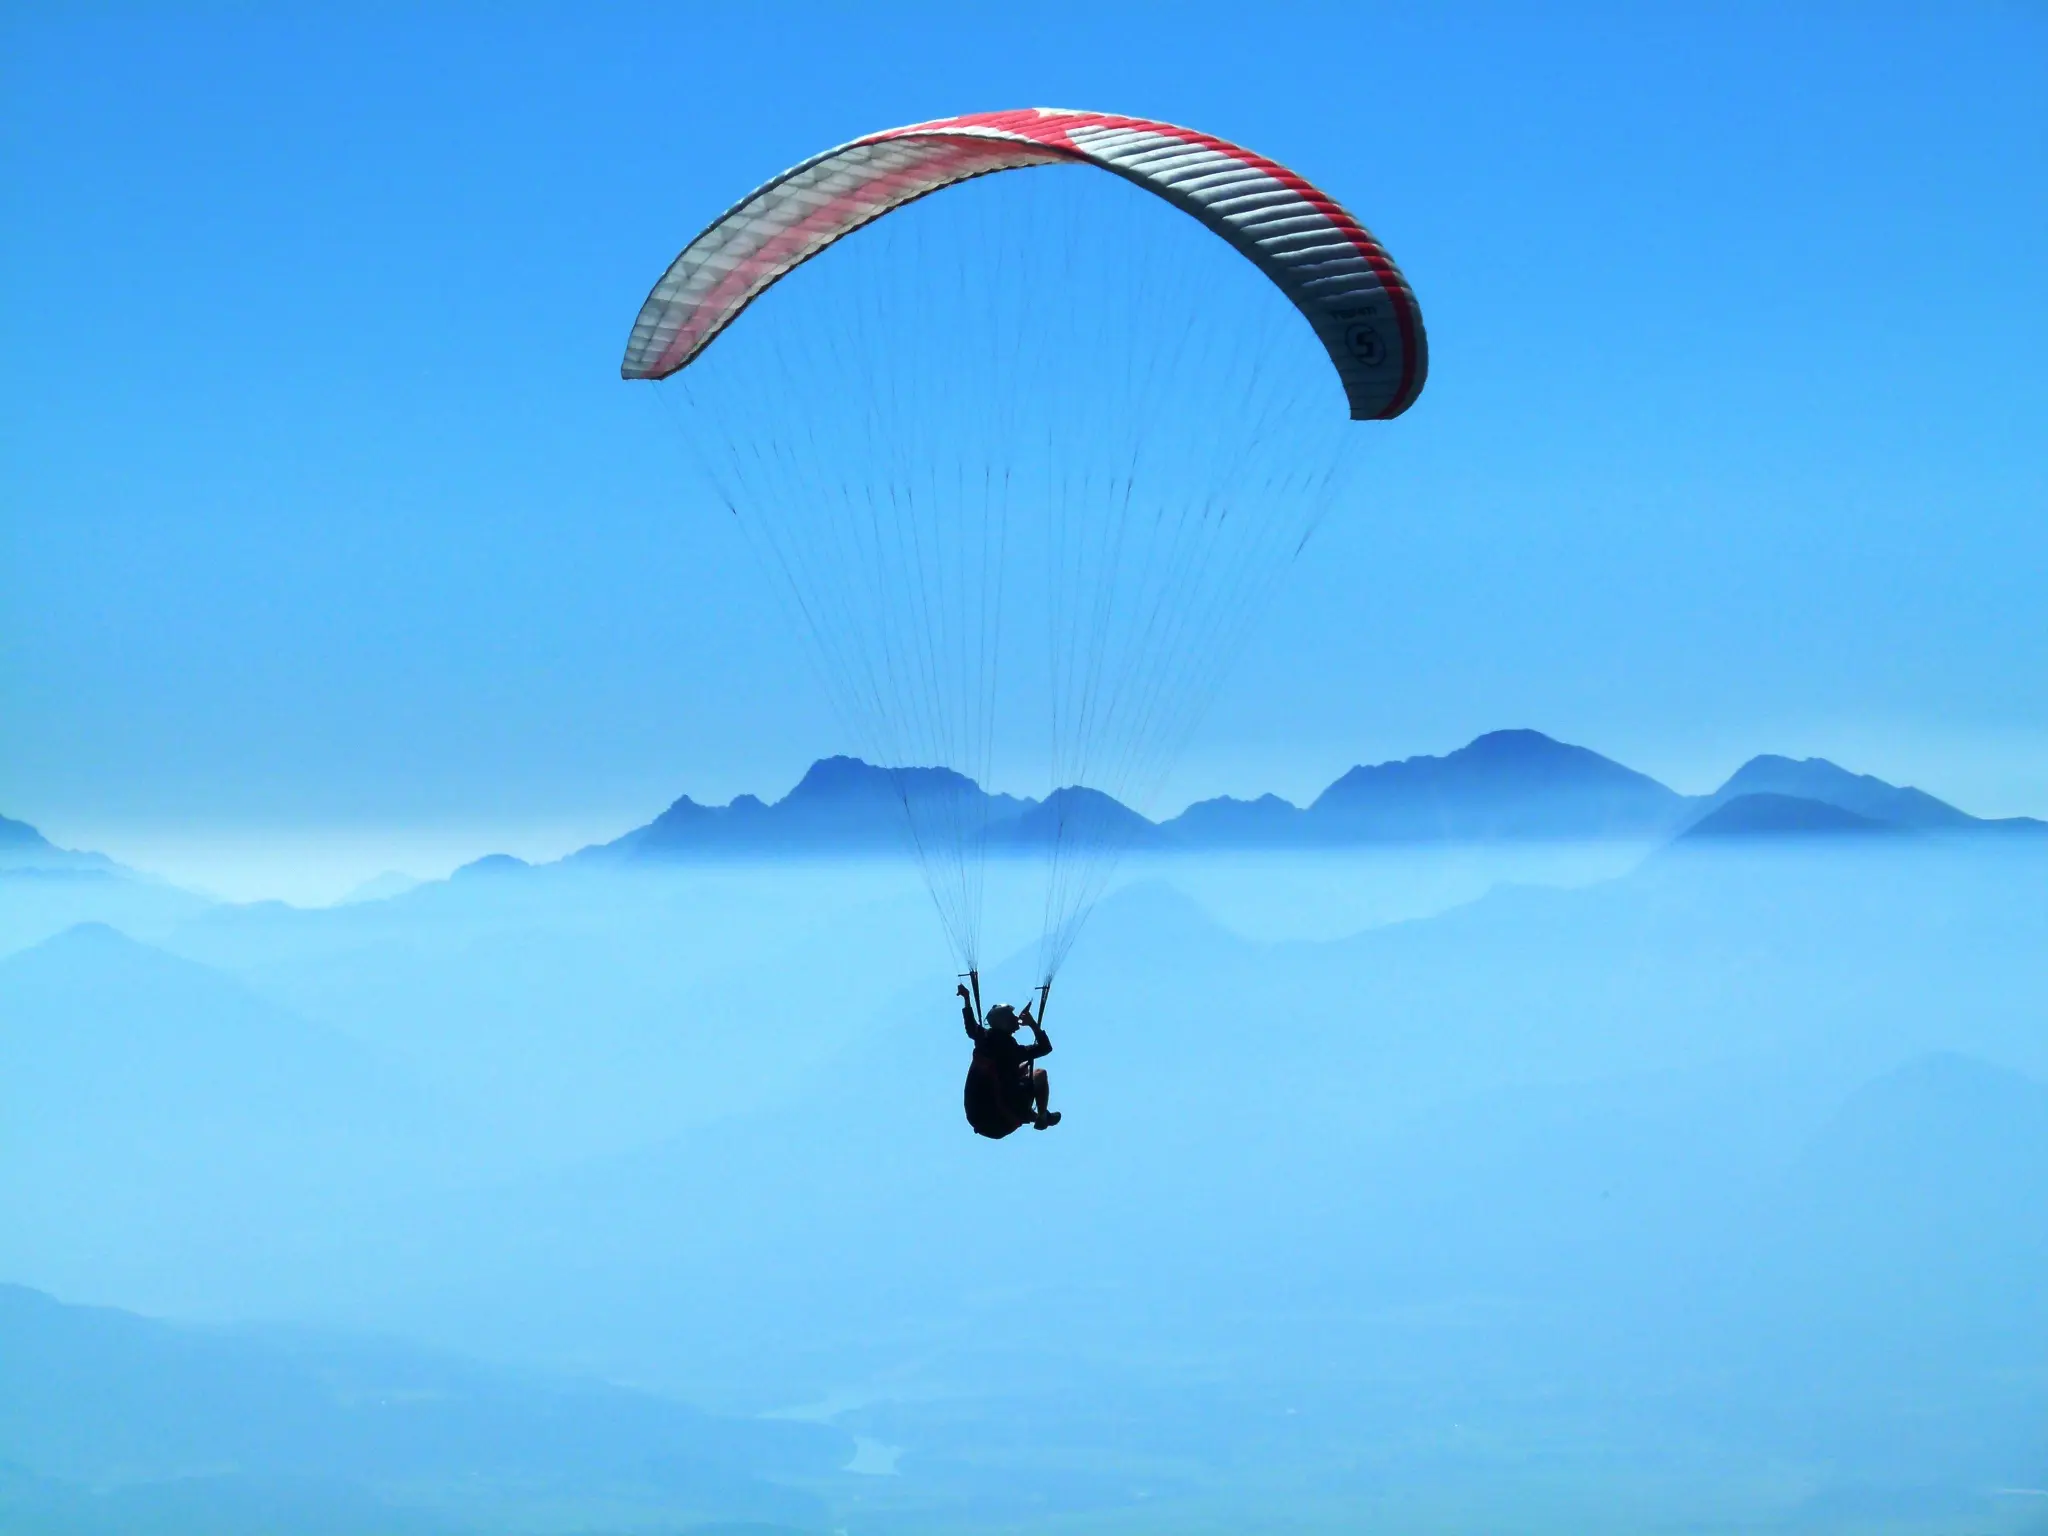 Paragliding performance training - cross-country authorization complete course - B license. Cross-country flights in Pinzgau with WE FLY - Flight School Pinzgau